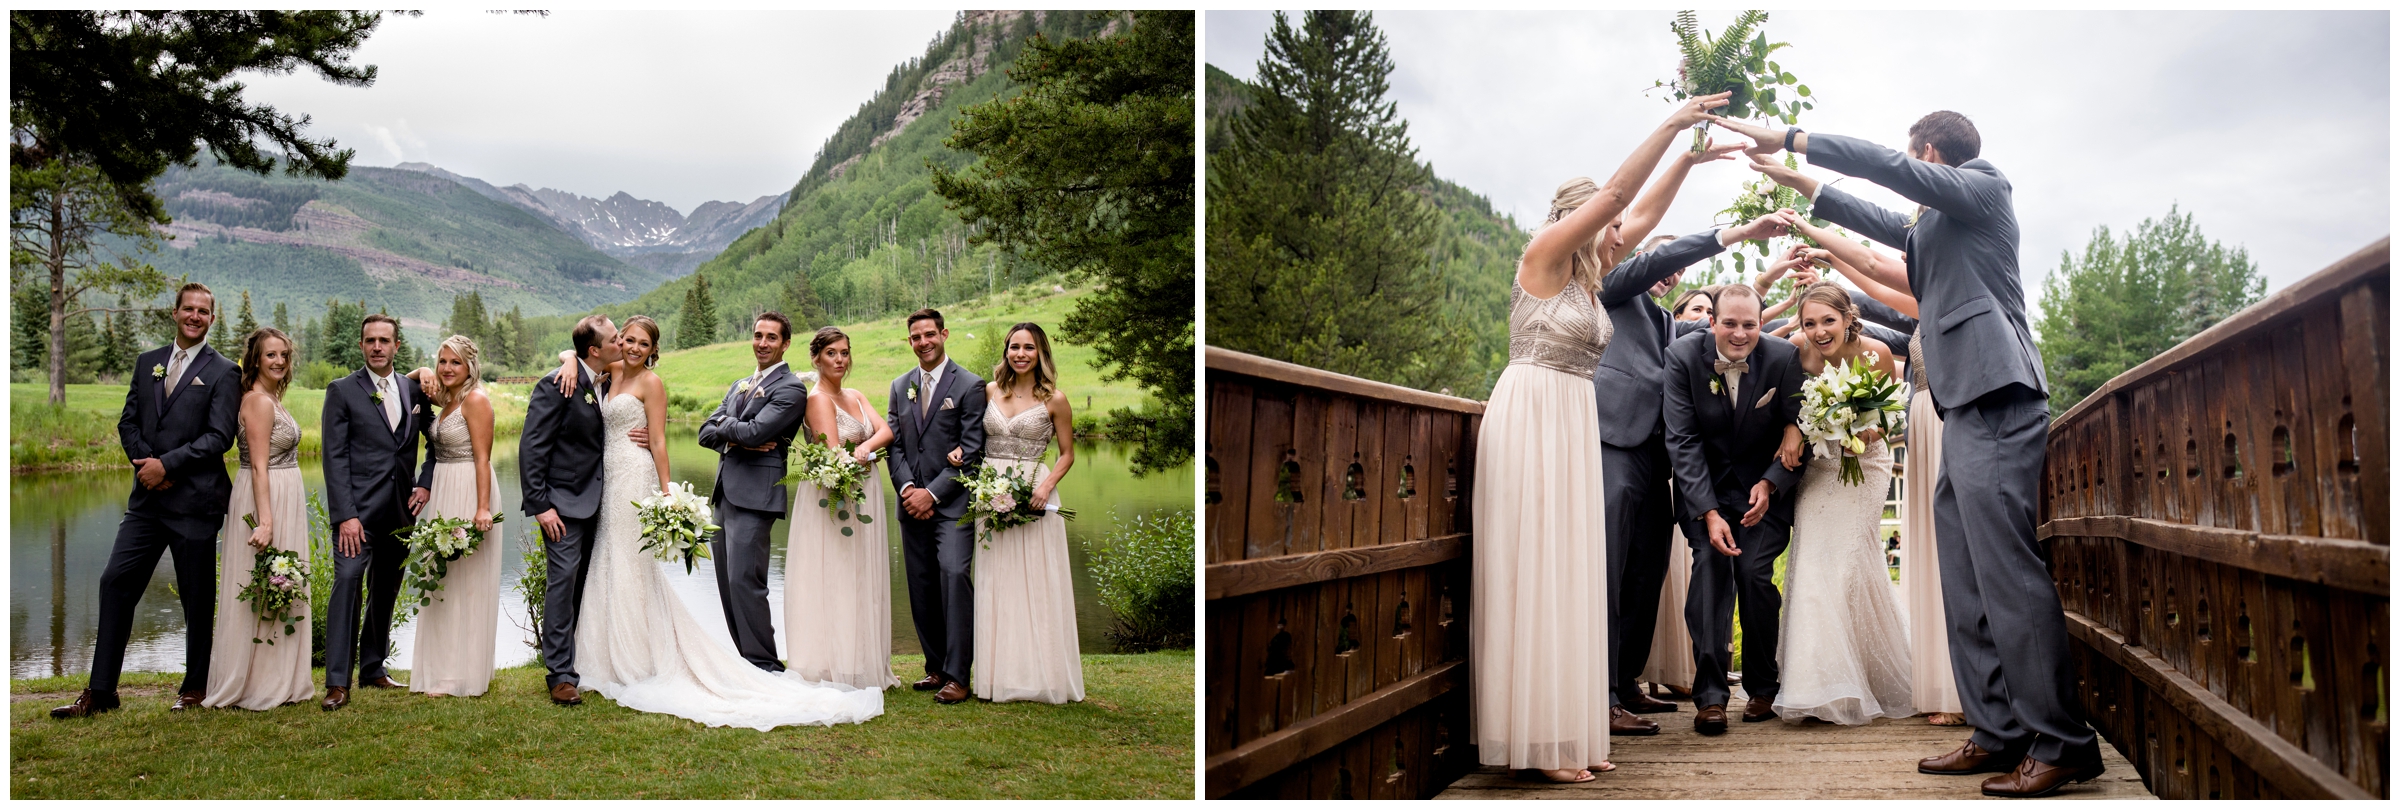 wedding party in blush and gray posing for bridal party photos in Vail Colorado 